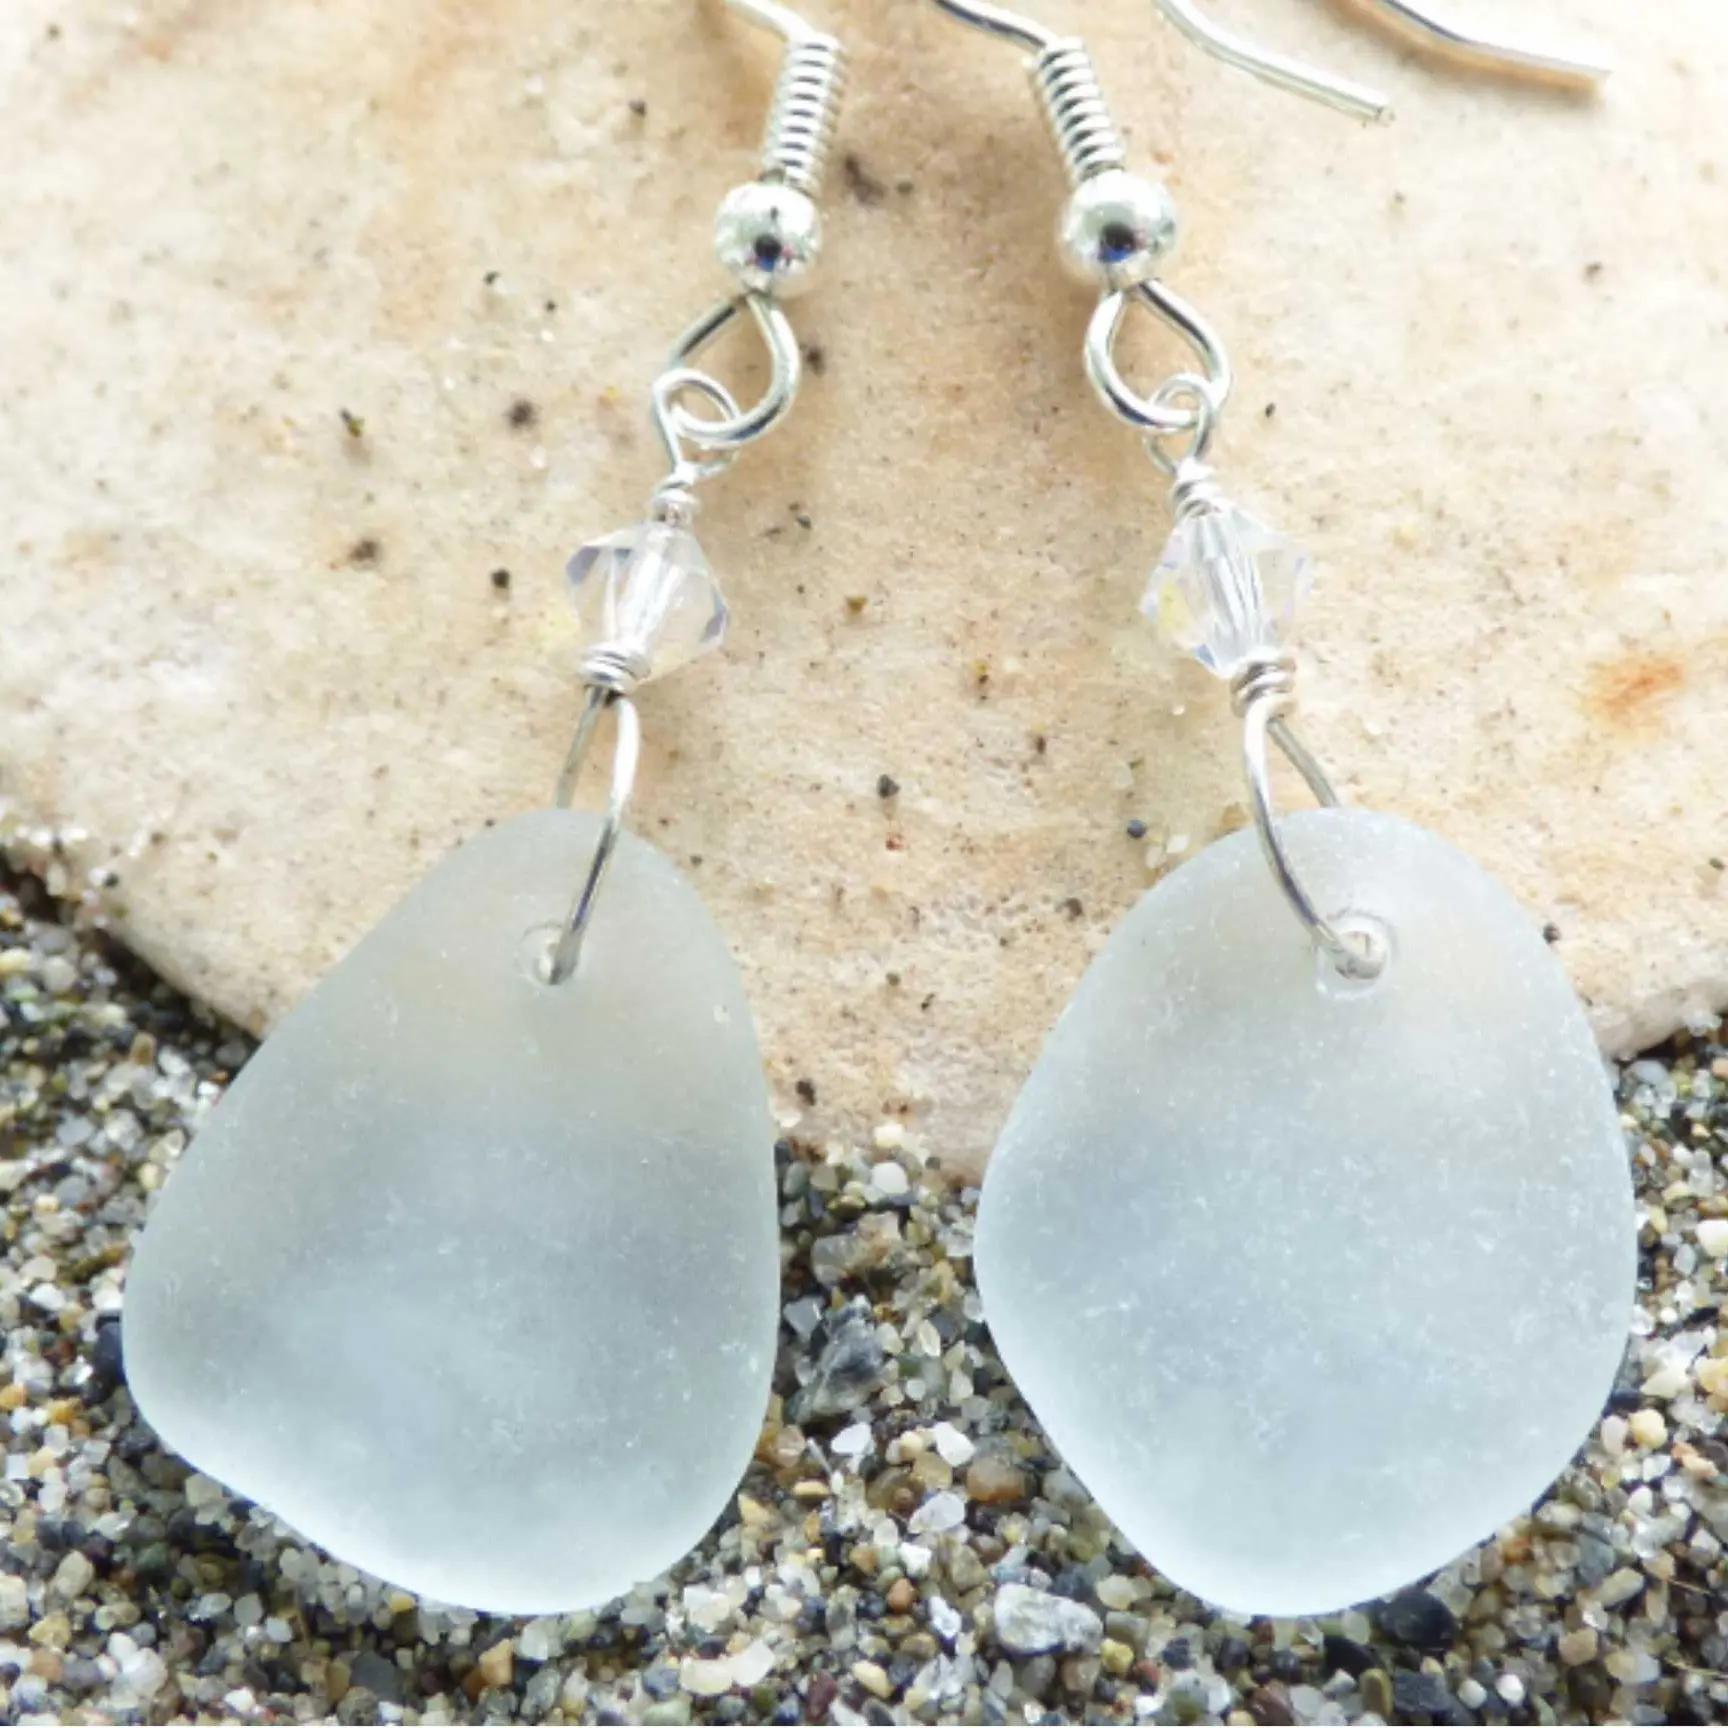 How to Make Sea Glass Jewelry DIY Sea Glass Earrings Easy Sea Glass Crafts Projects